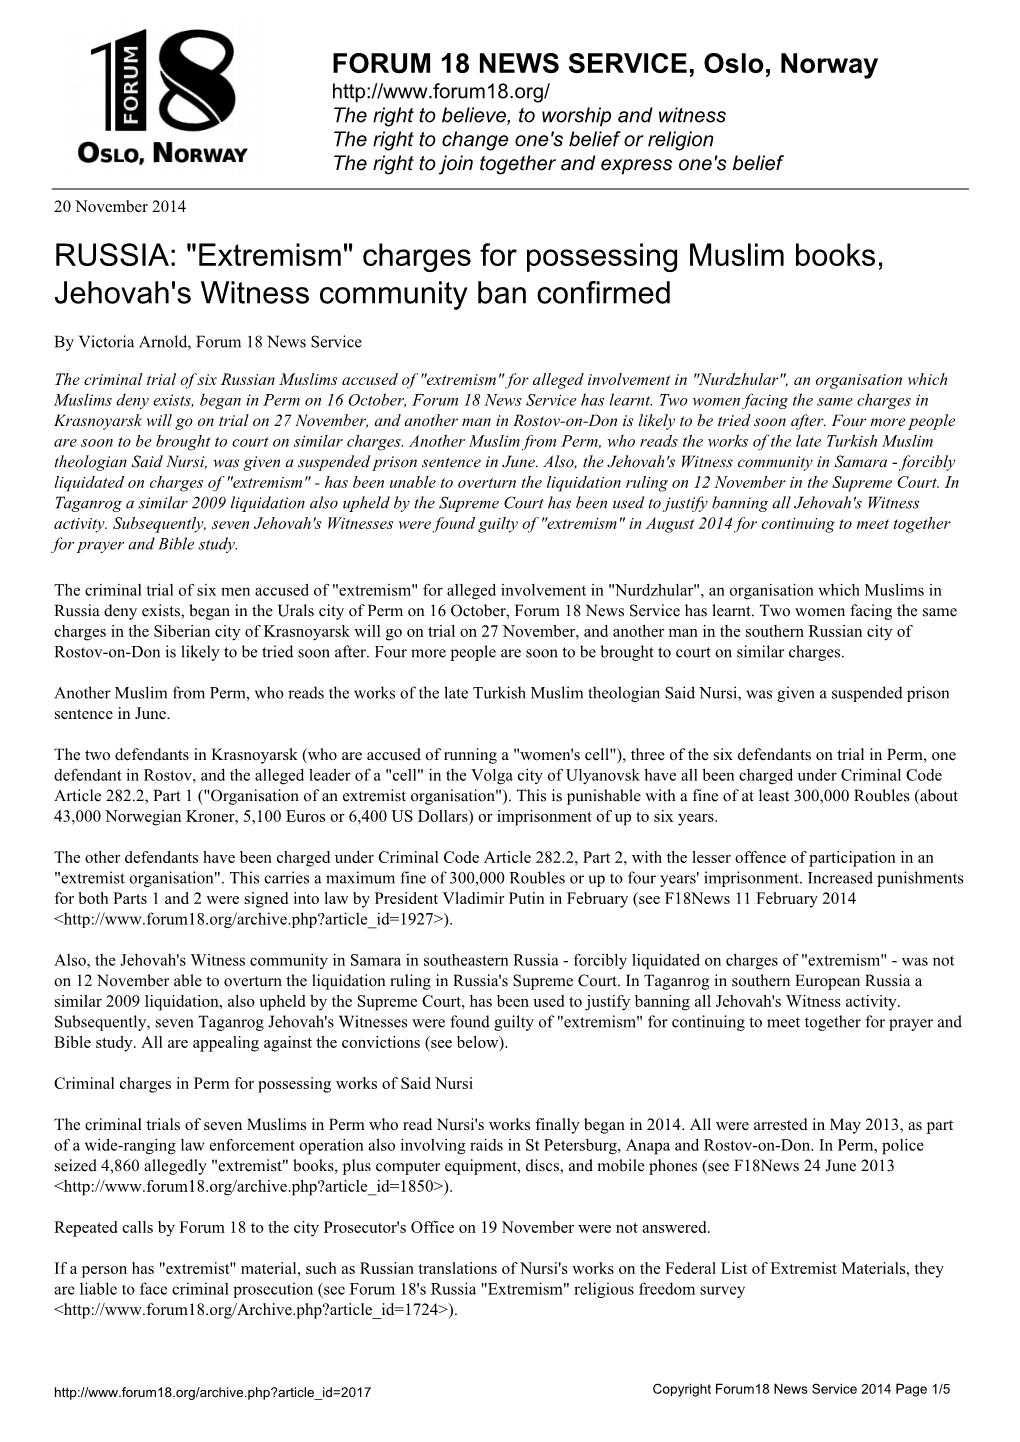 RUSSIA: "Extremism" Charges for Possessing Muslim Books, Jehovah's Witness Community Ban Confirmed